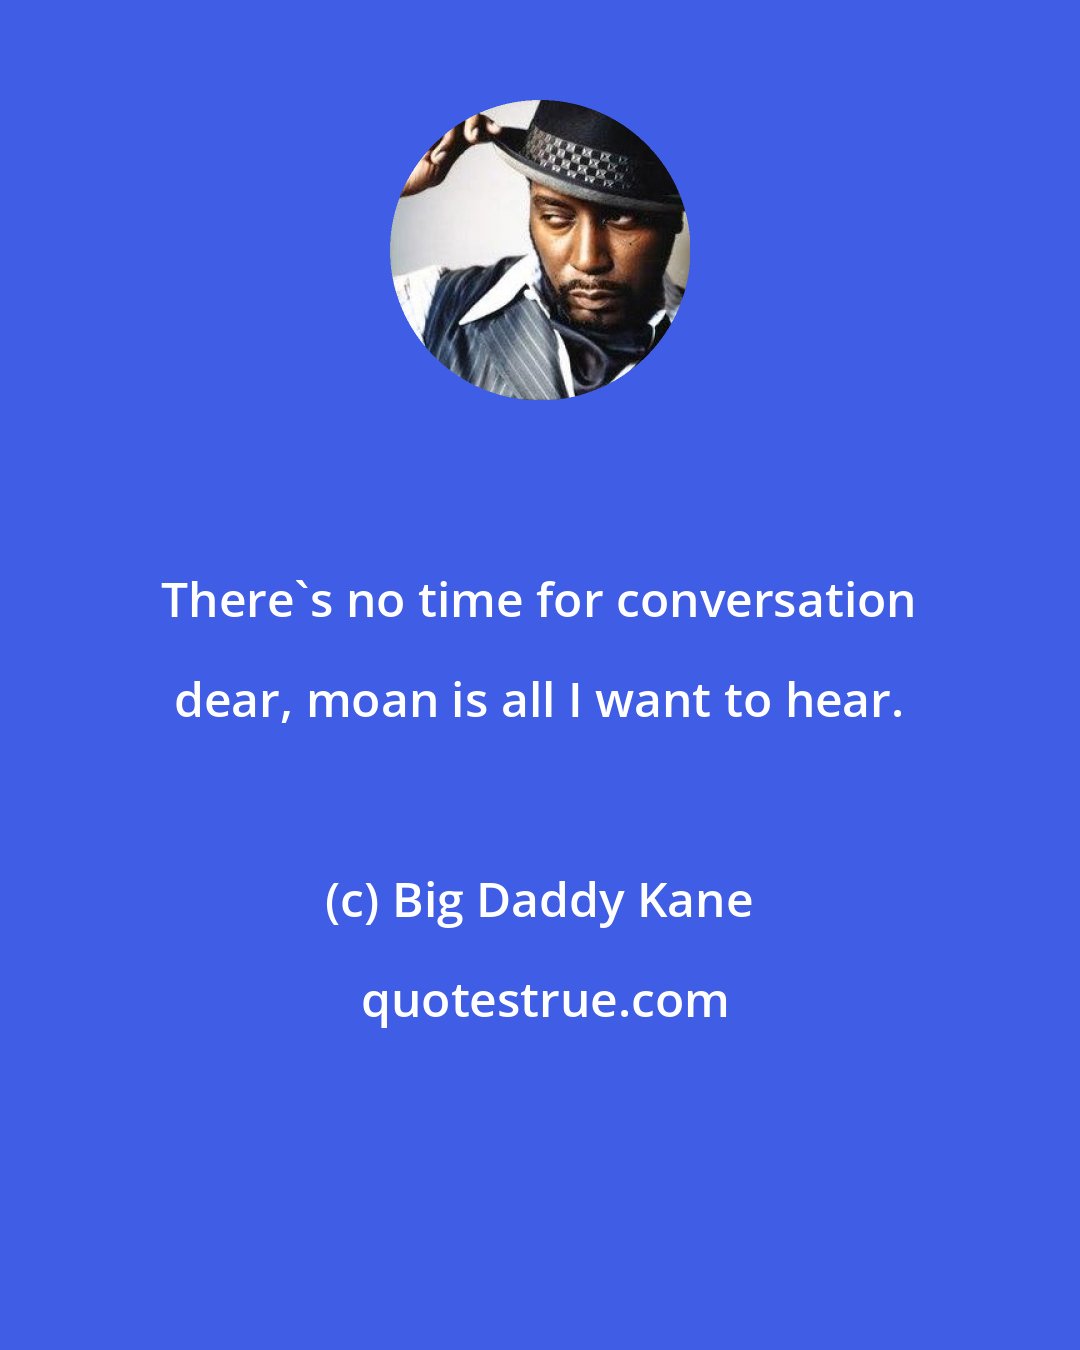 Big Daddy Kane: There's no time for conversation dear, moan is all I want to hear.